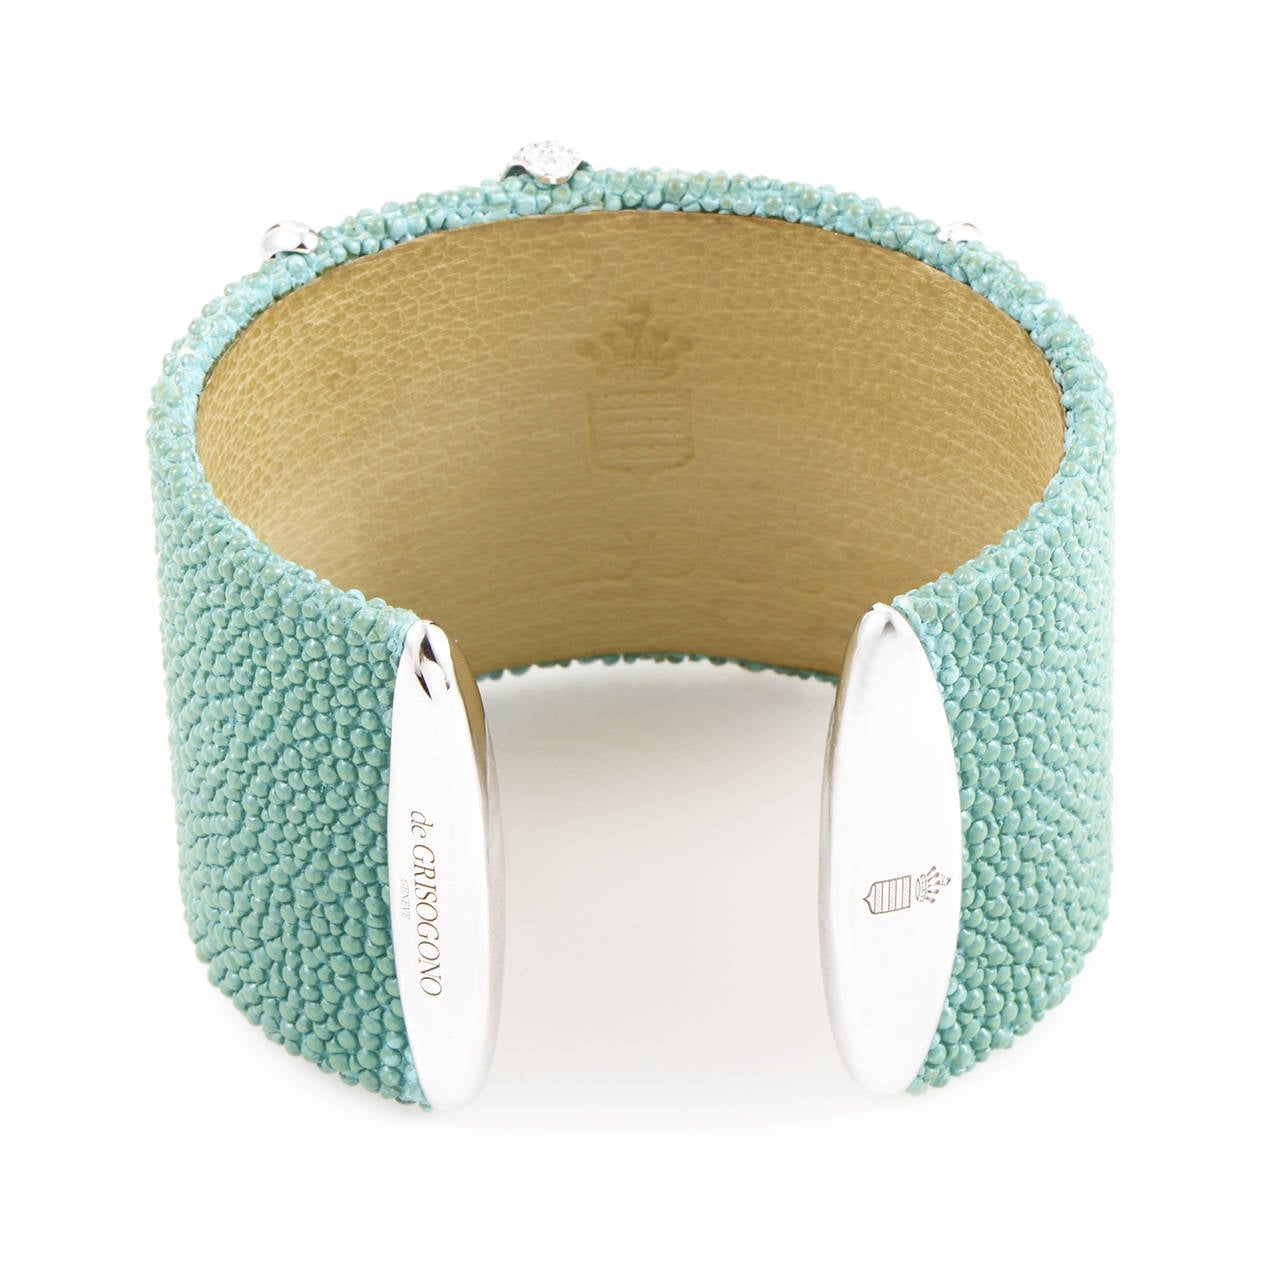 This de Grisogono bangle possesses a distinct and unique style highlighted by a highly durable and beautiful green Bijoux Galuchat construction and brilliant-cut diamonds. The dazzling diamonds are mounted on 18K white gold inserts, further adding